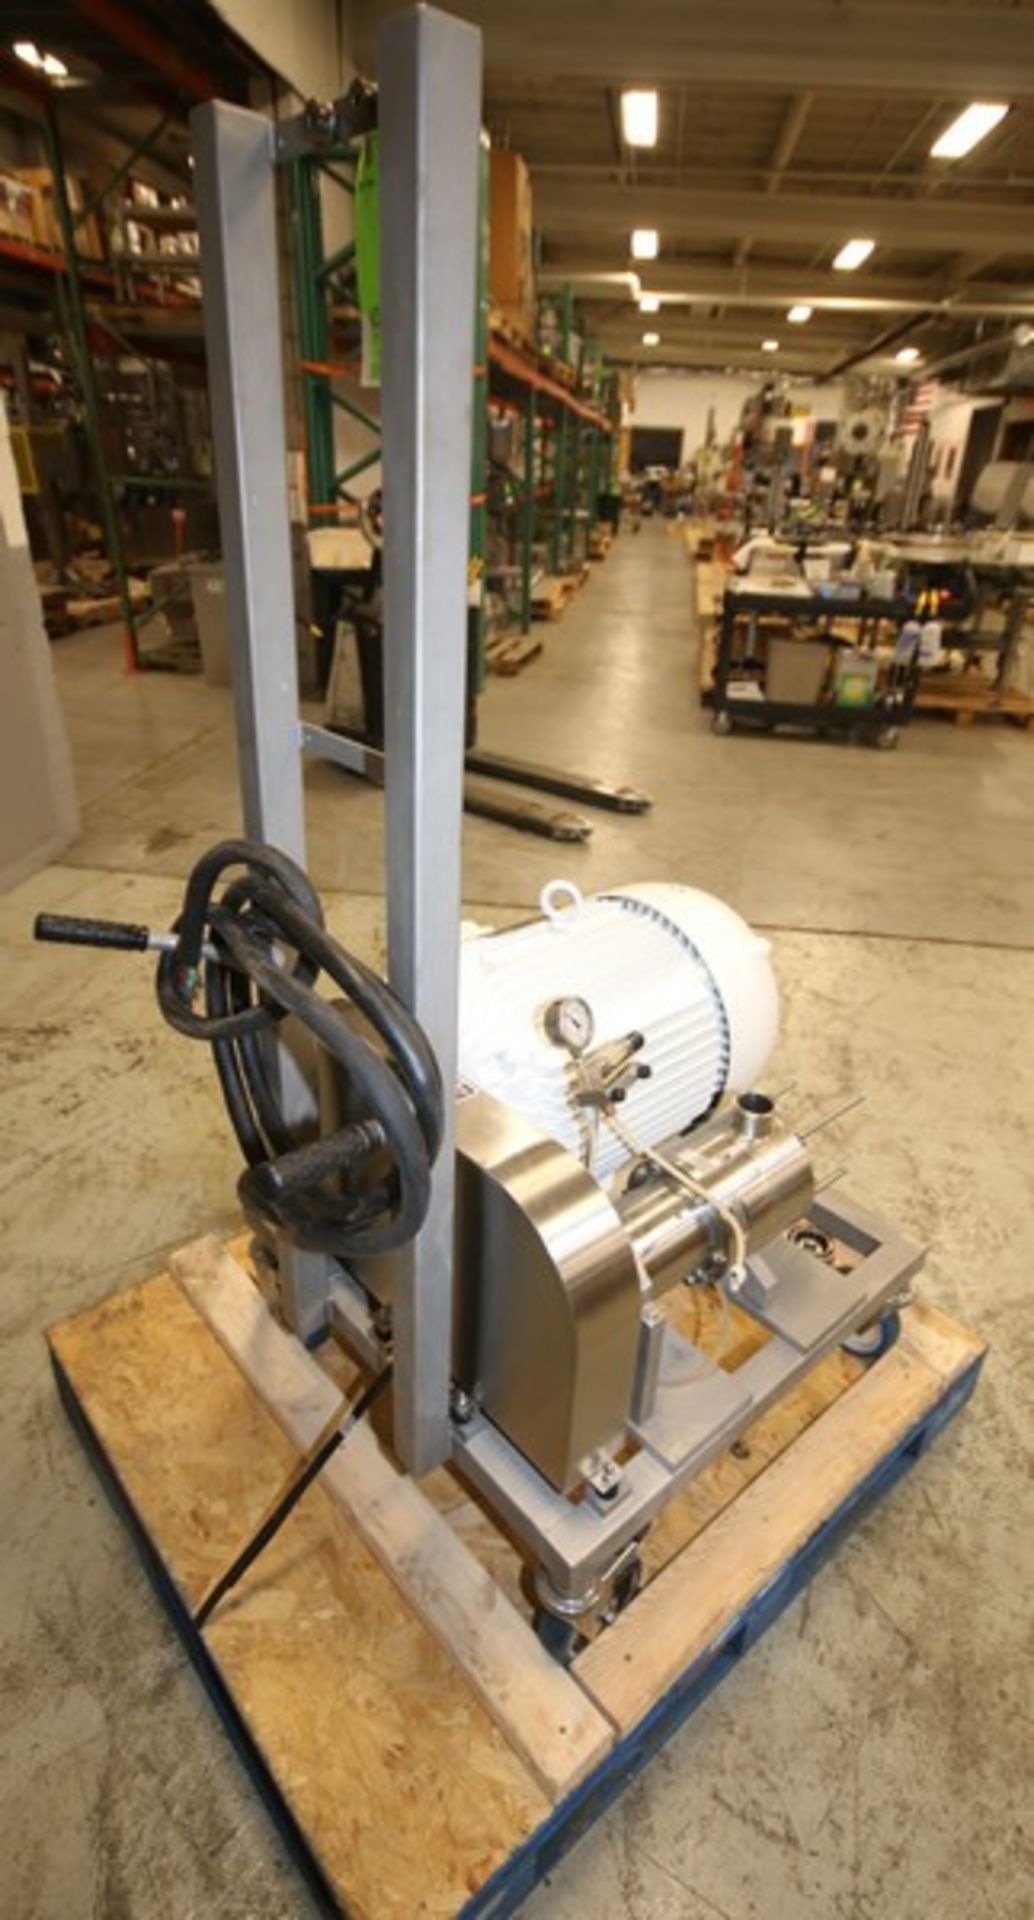 2020 Admix Boston S/S Shear Mill, Model QS-37-3, SN 66870-2, with 40 hp / 3545/5400 rpm Motor, 460 - Image 10 of 12